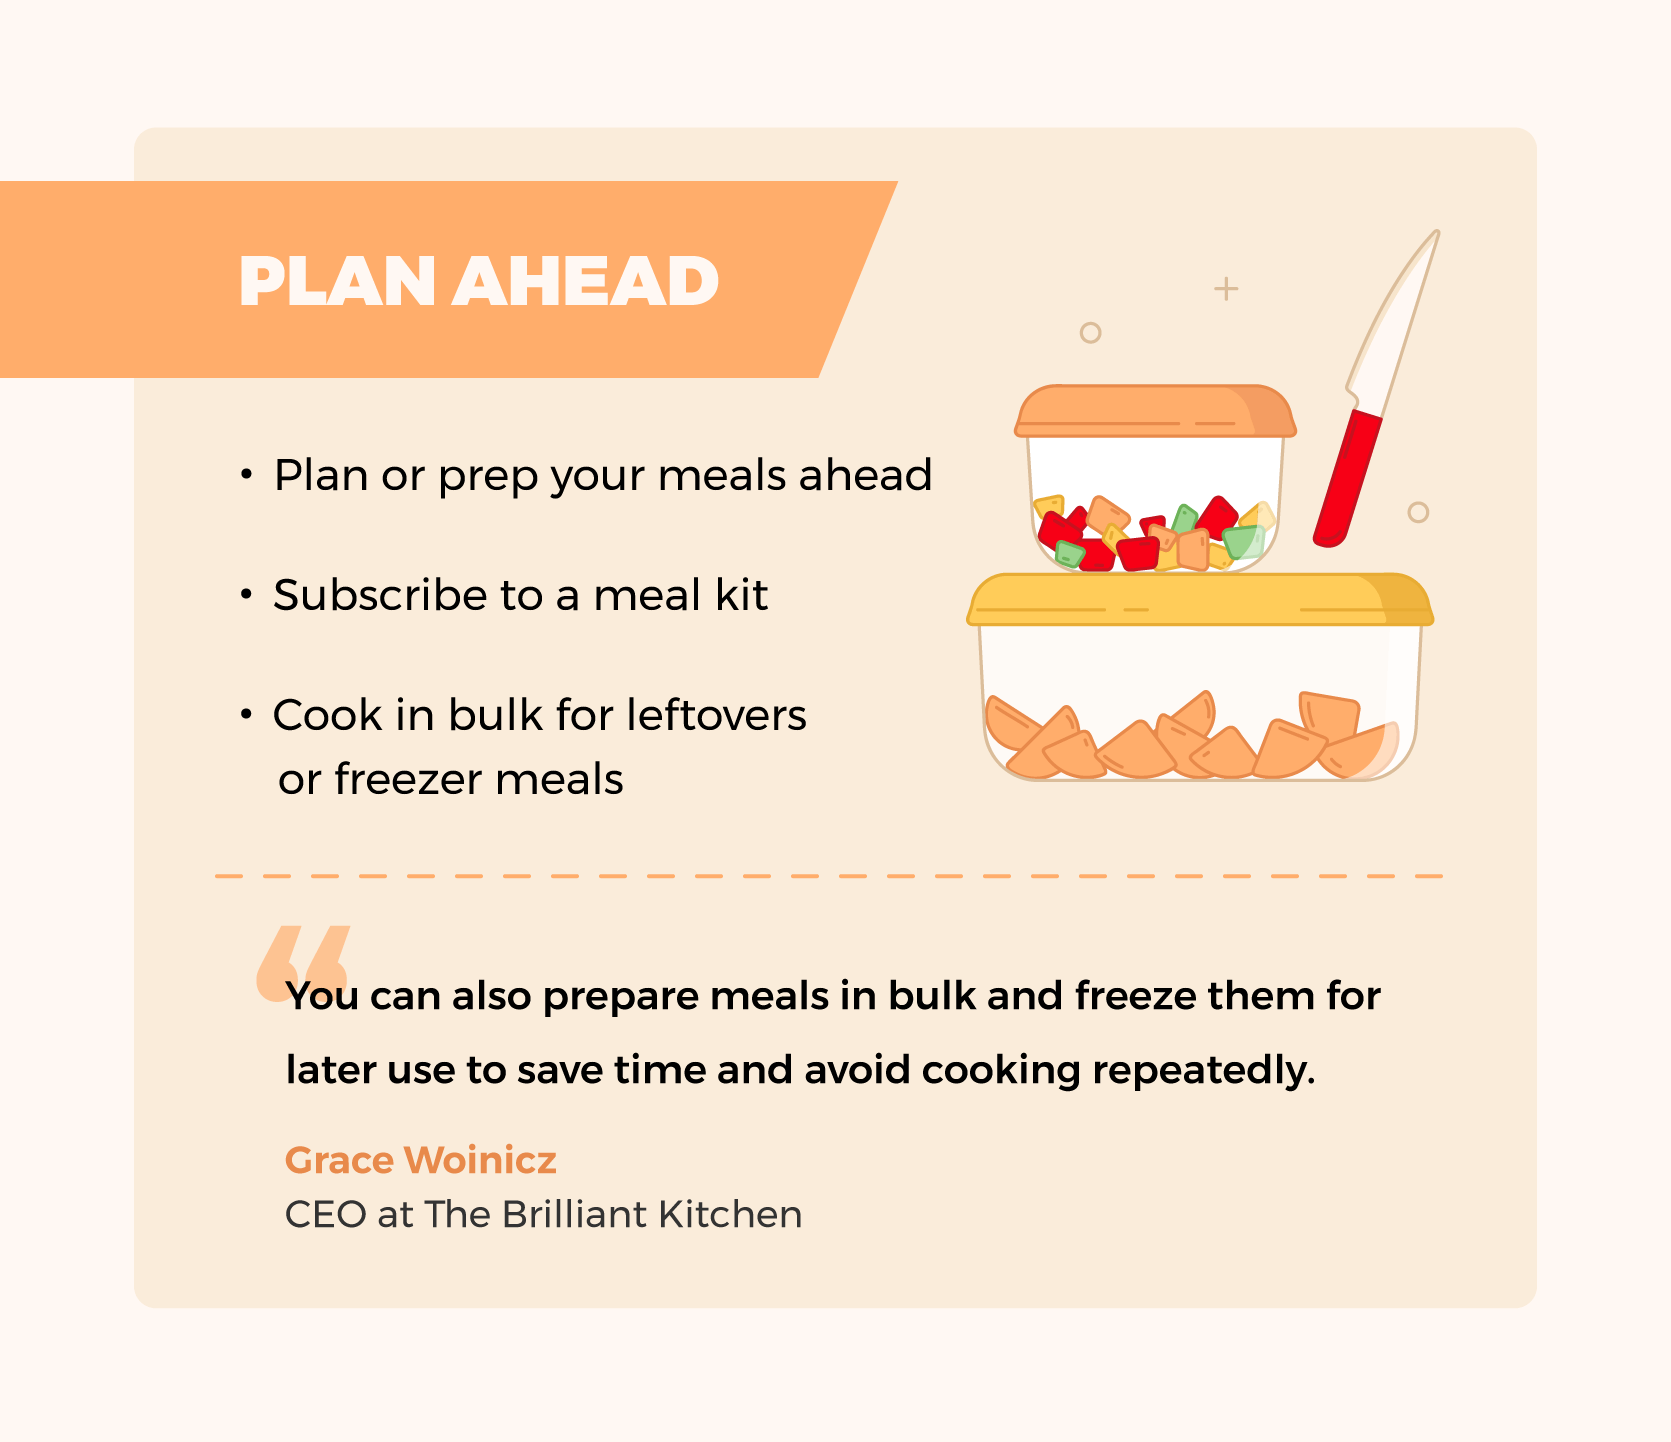 Illustration of meal planning and prepping tips with expert quote.